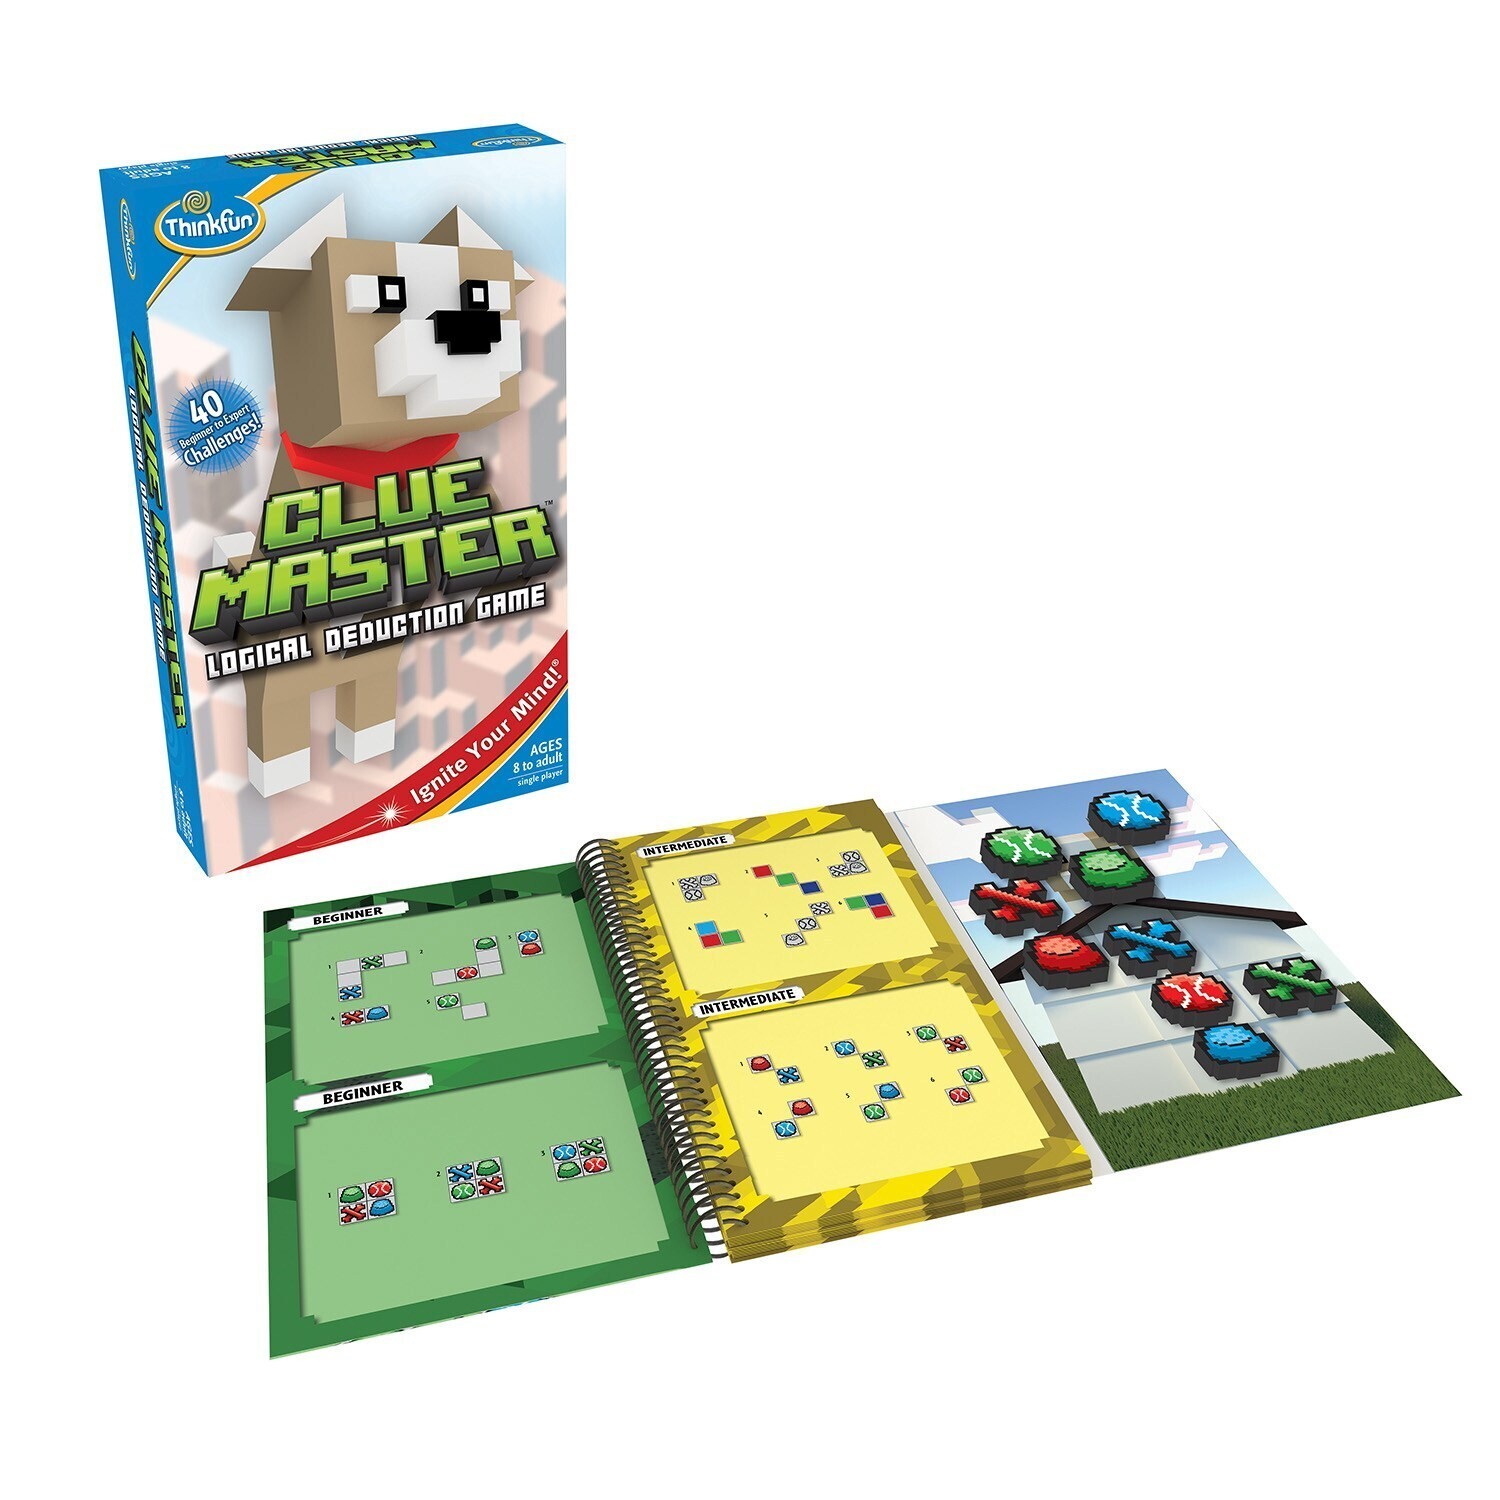 Thinkfun Clue Master Logical Deduction Game (ages 8+)